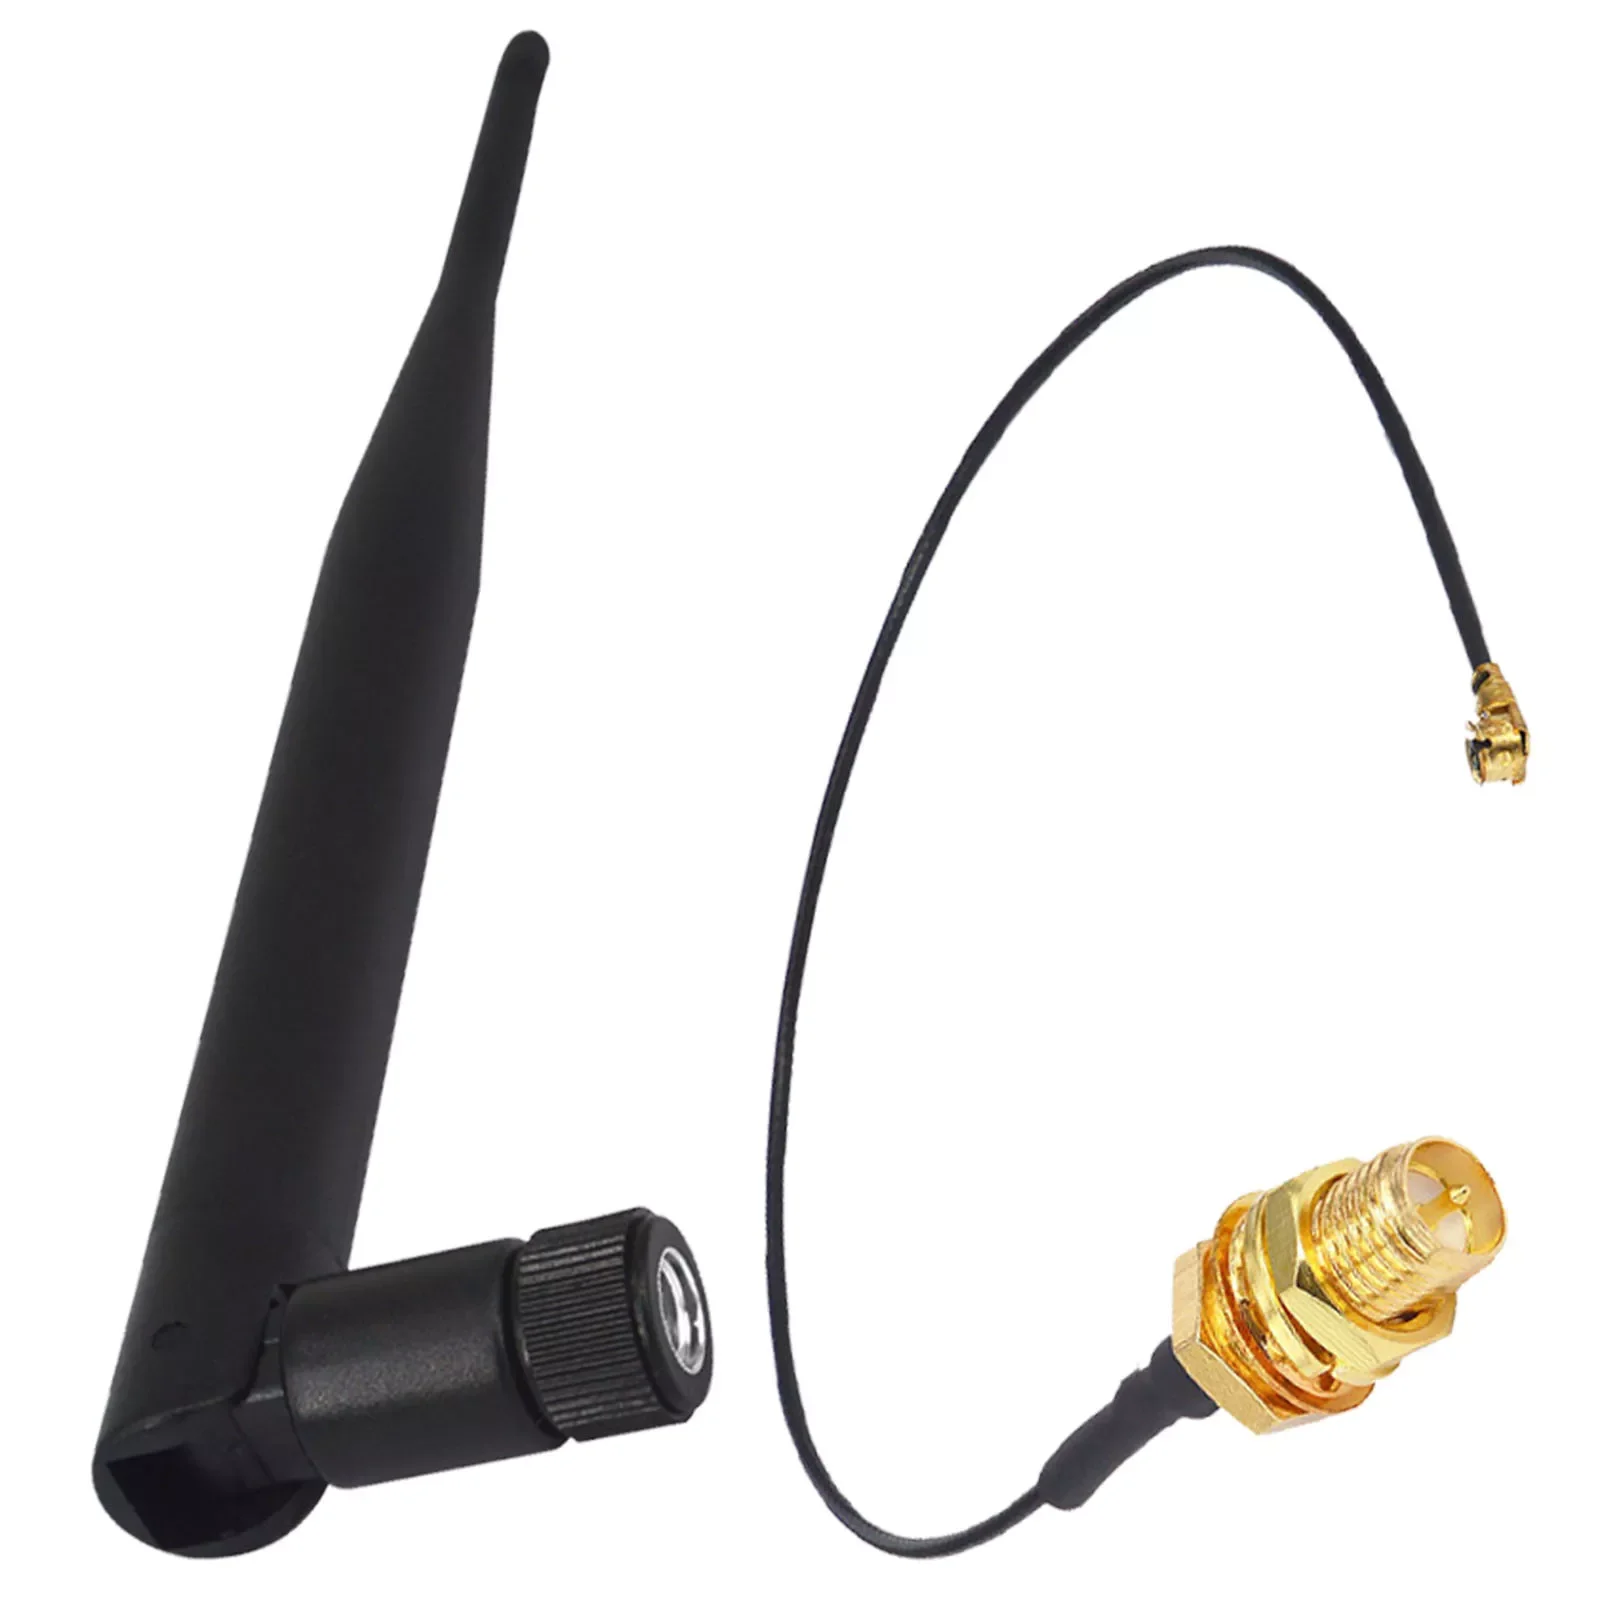 

WiFi Antenna 2.4 GHz 5dBi 802.11b/g Aerial RP-SMA Male Wireless Router +Mini PCI U.FL IPX to RP SMA Jack Pigtail Cable